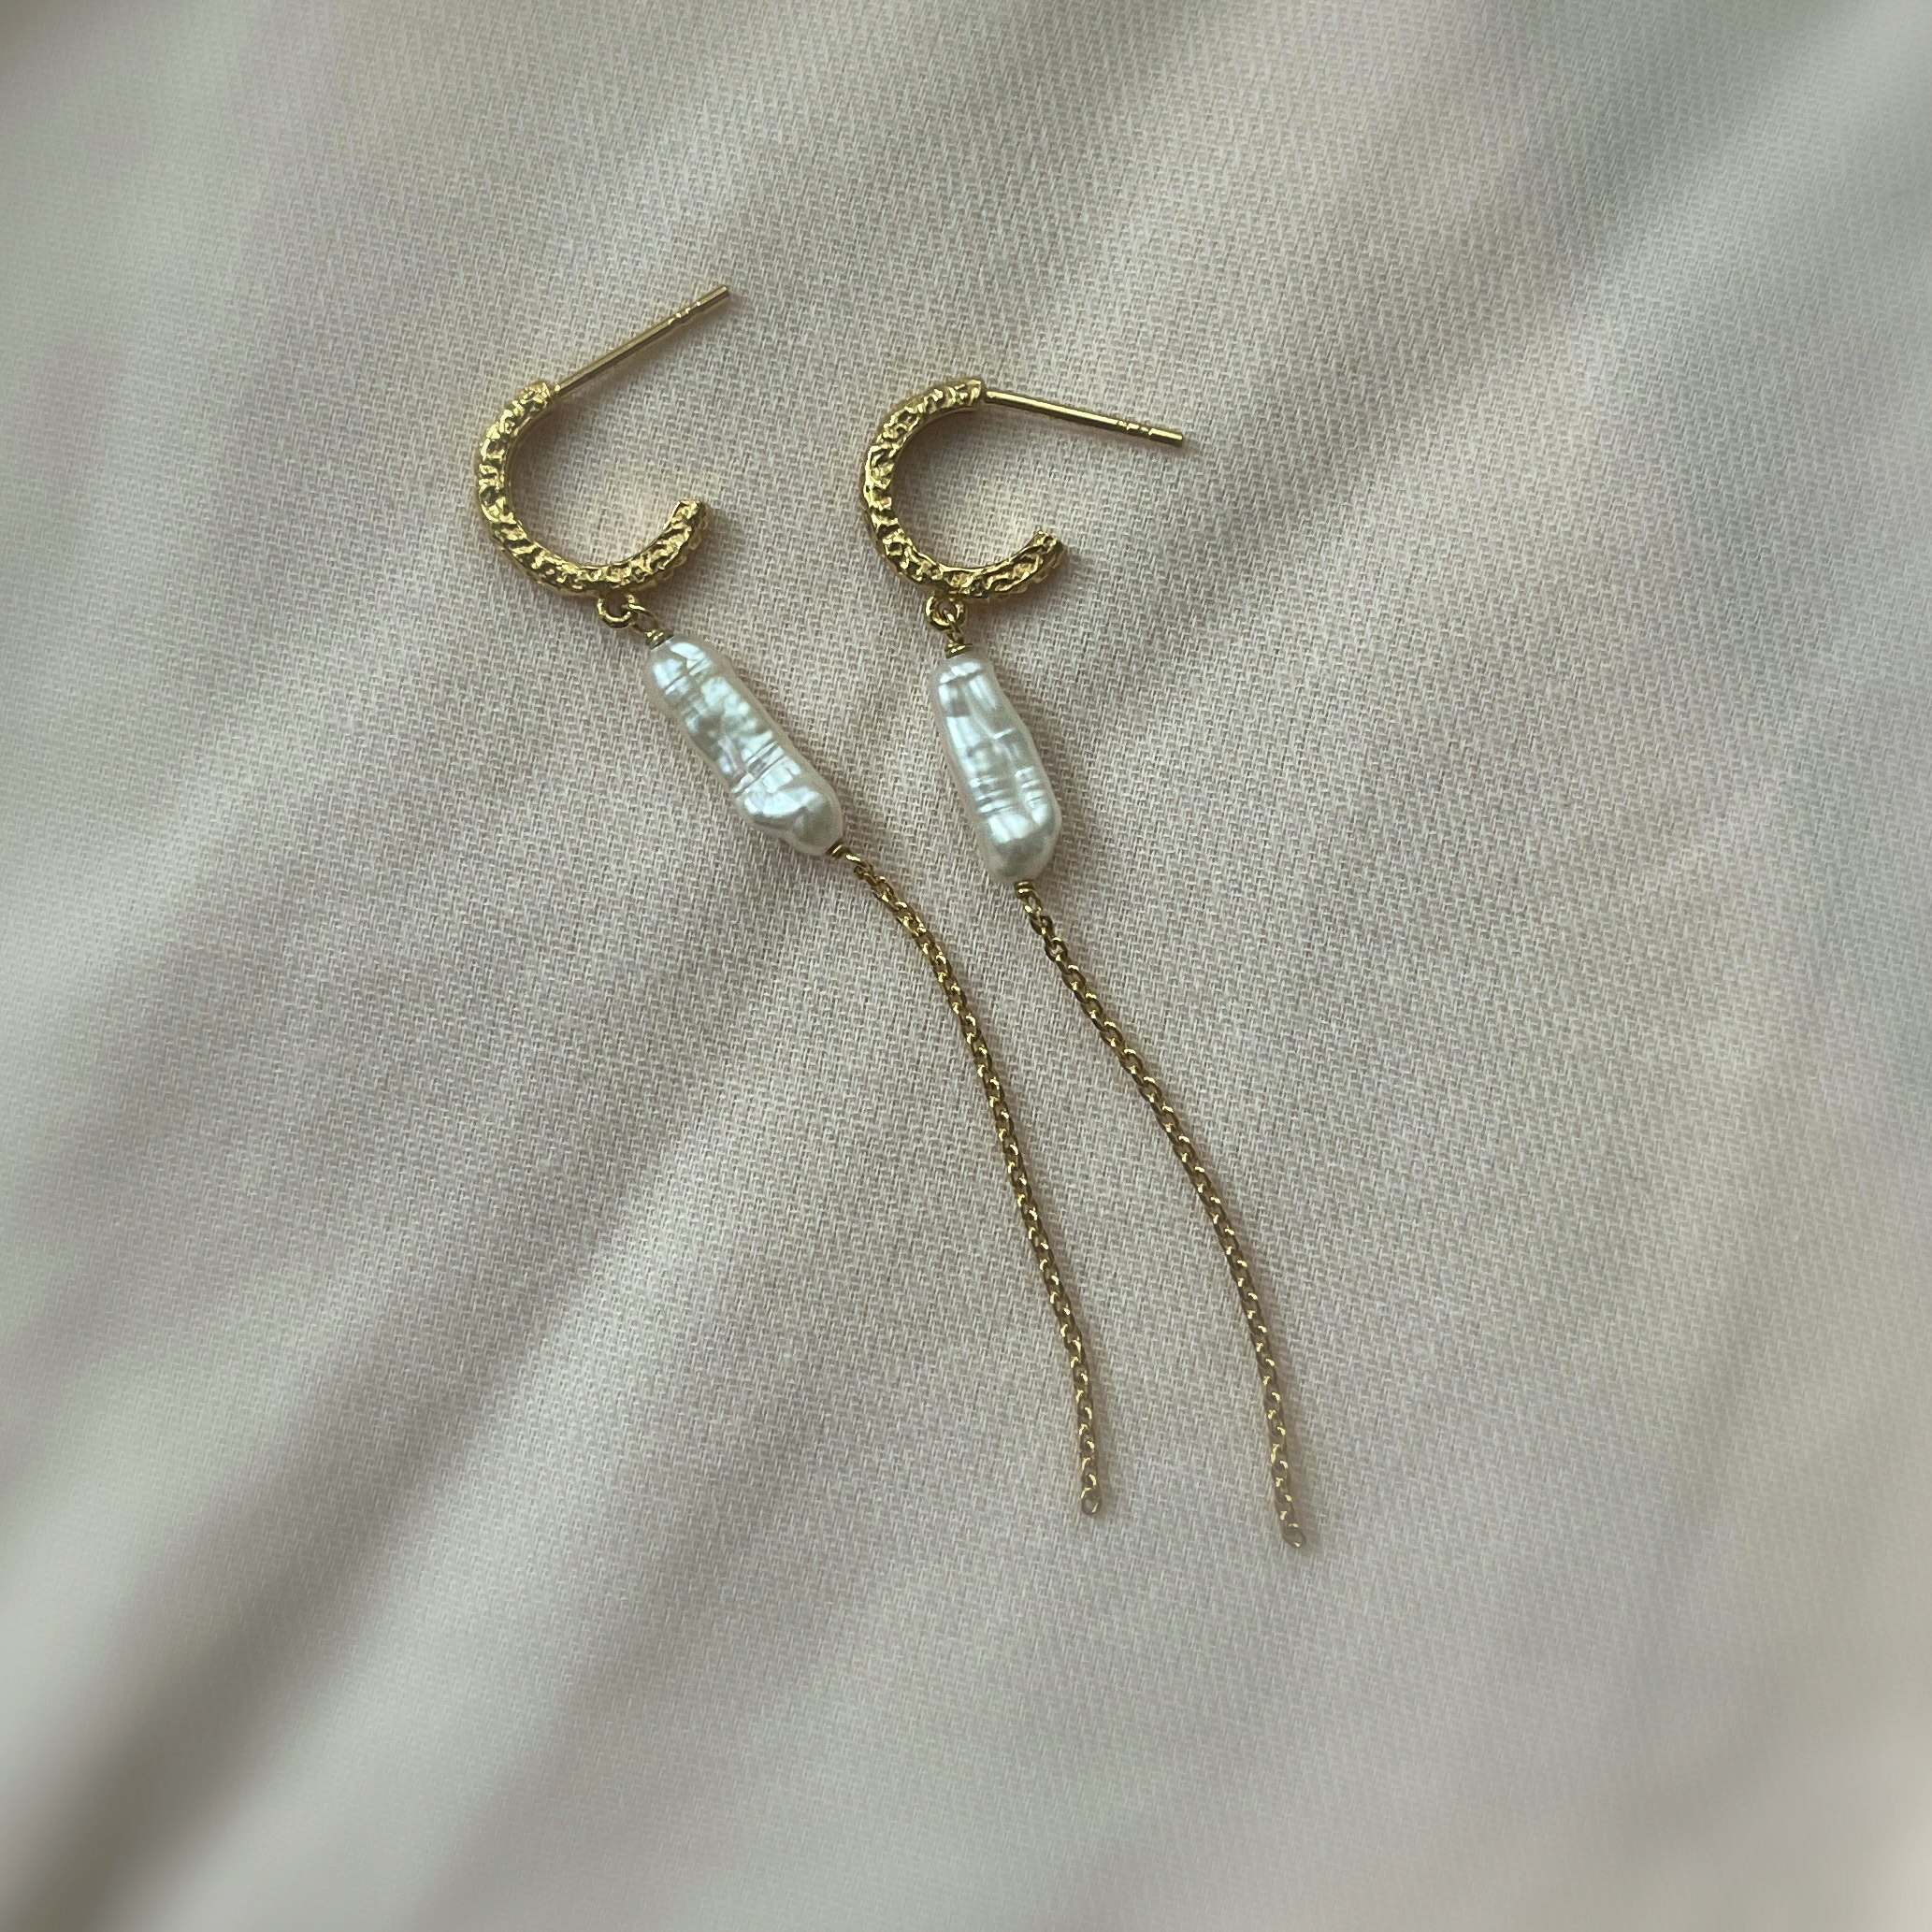 Beach Earchains from Sistie in Goldplated Silver Sterling 925